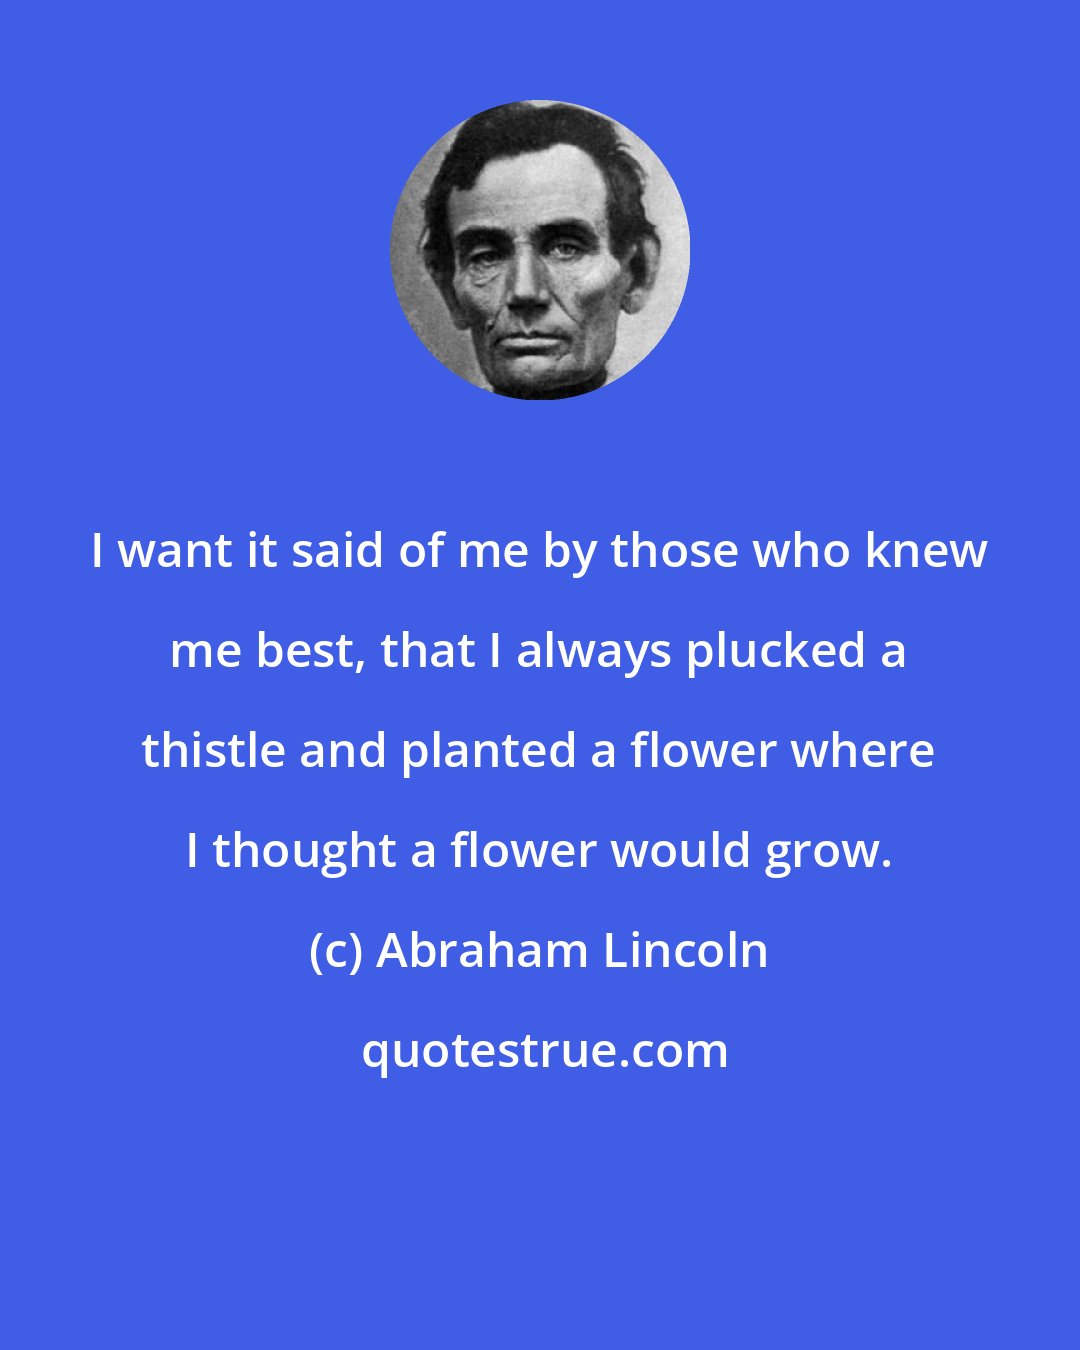 Abraham Lincoln: I want it said of me by those who knew me best, that I always plucked a thistle and planted a flower where I thought a flower would grow.